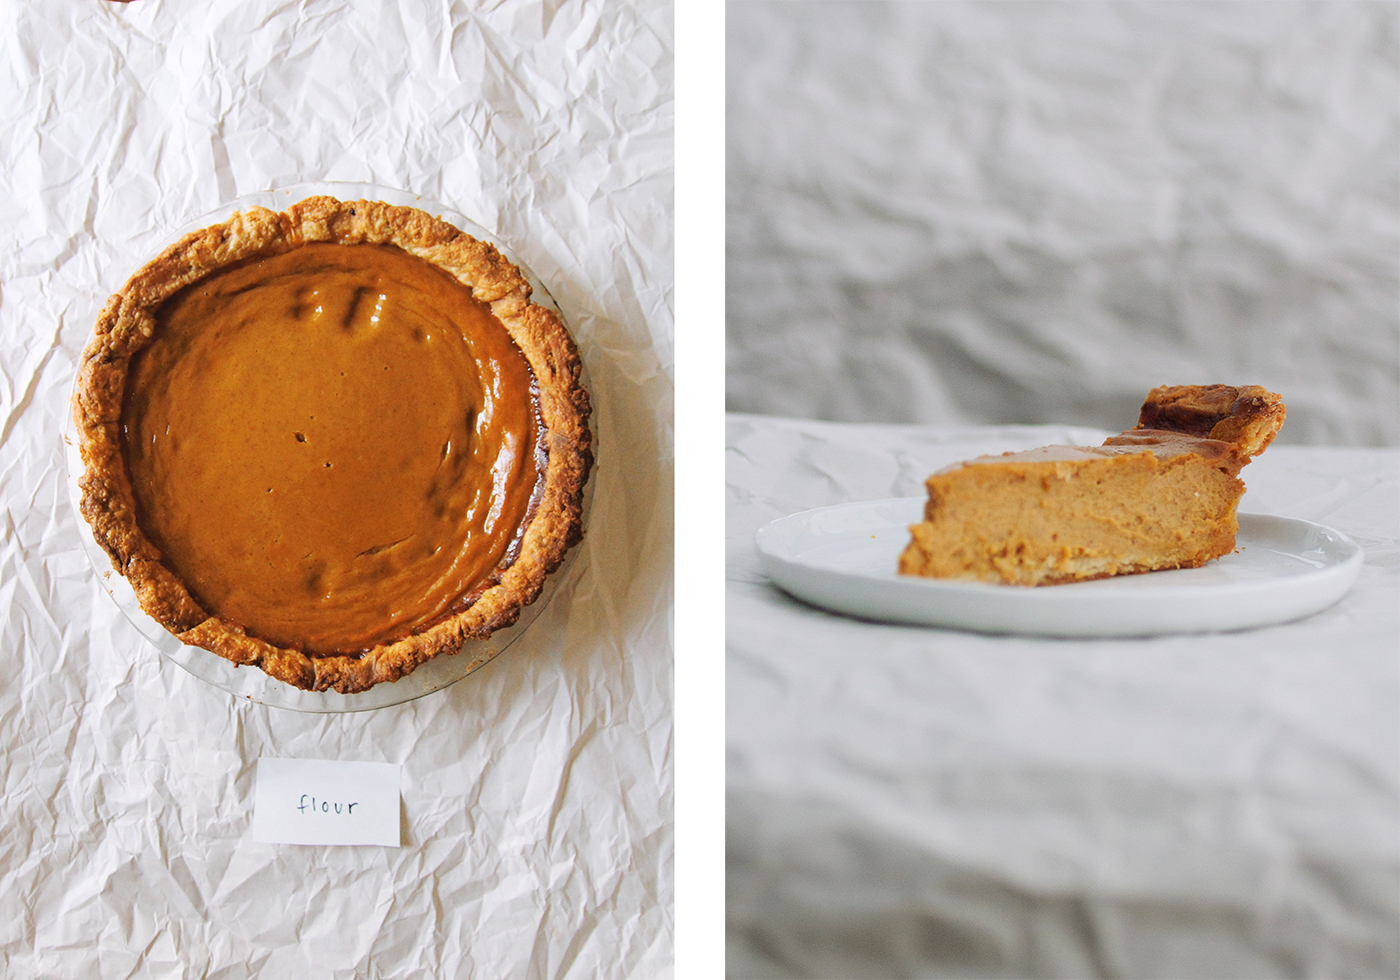 From left to right: Overhead view and sideview of Flour Bakery's pumpkin pie recipe